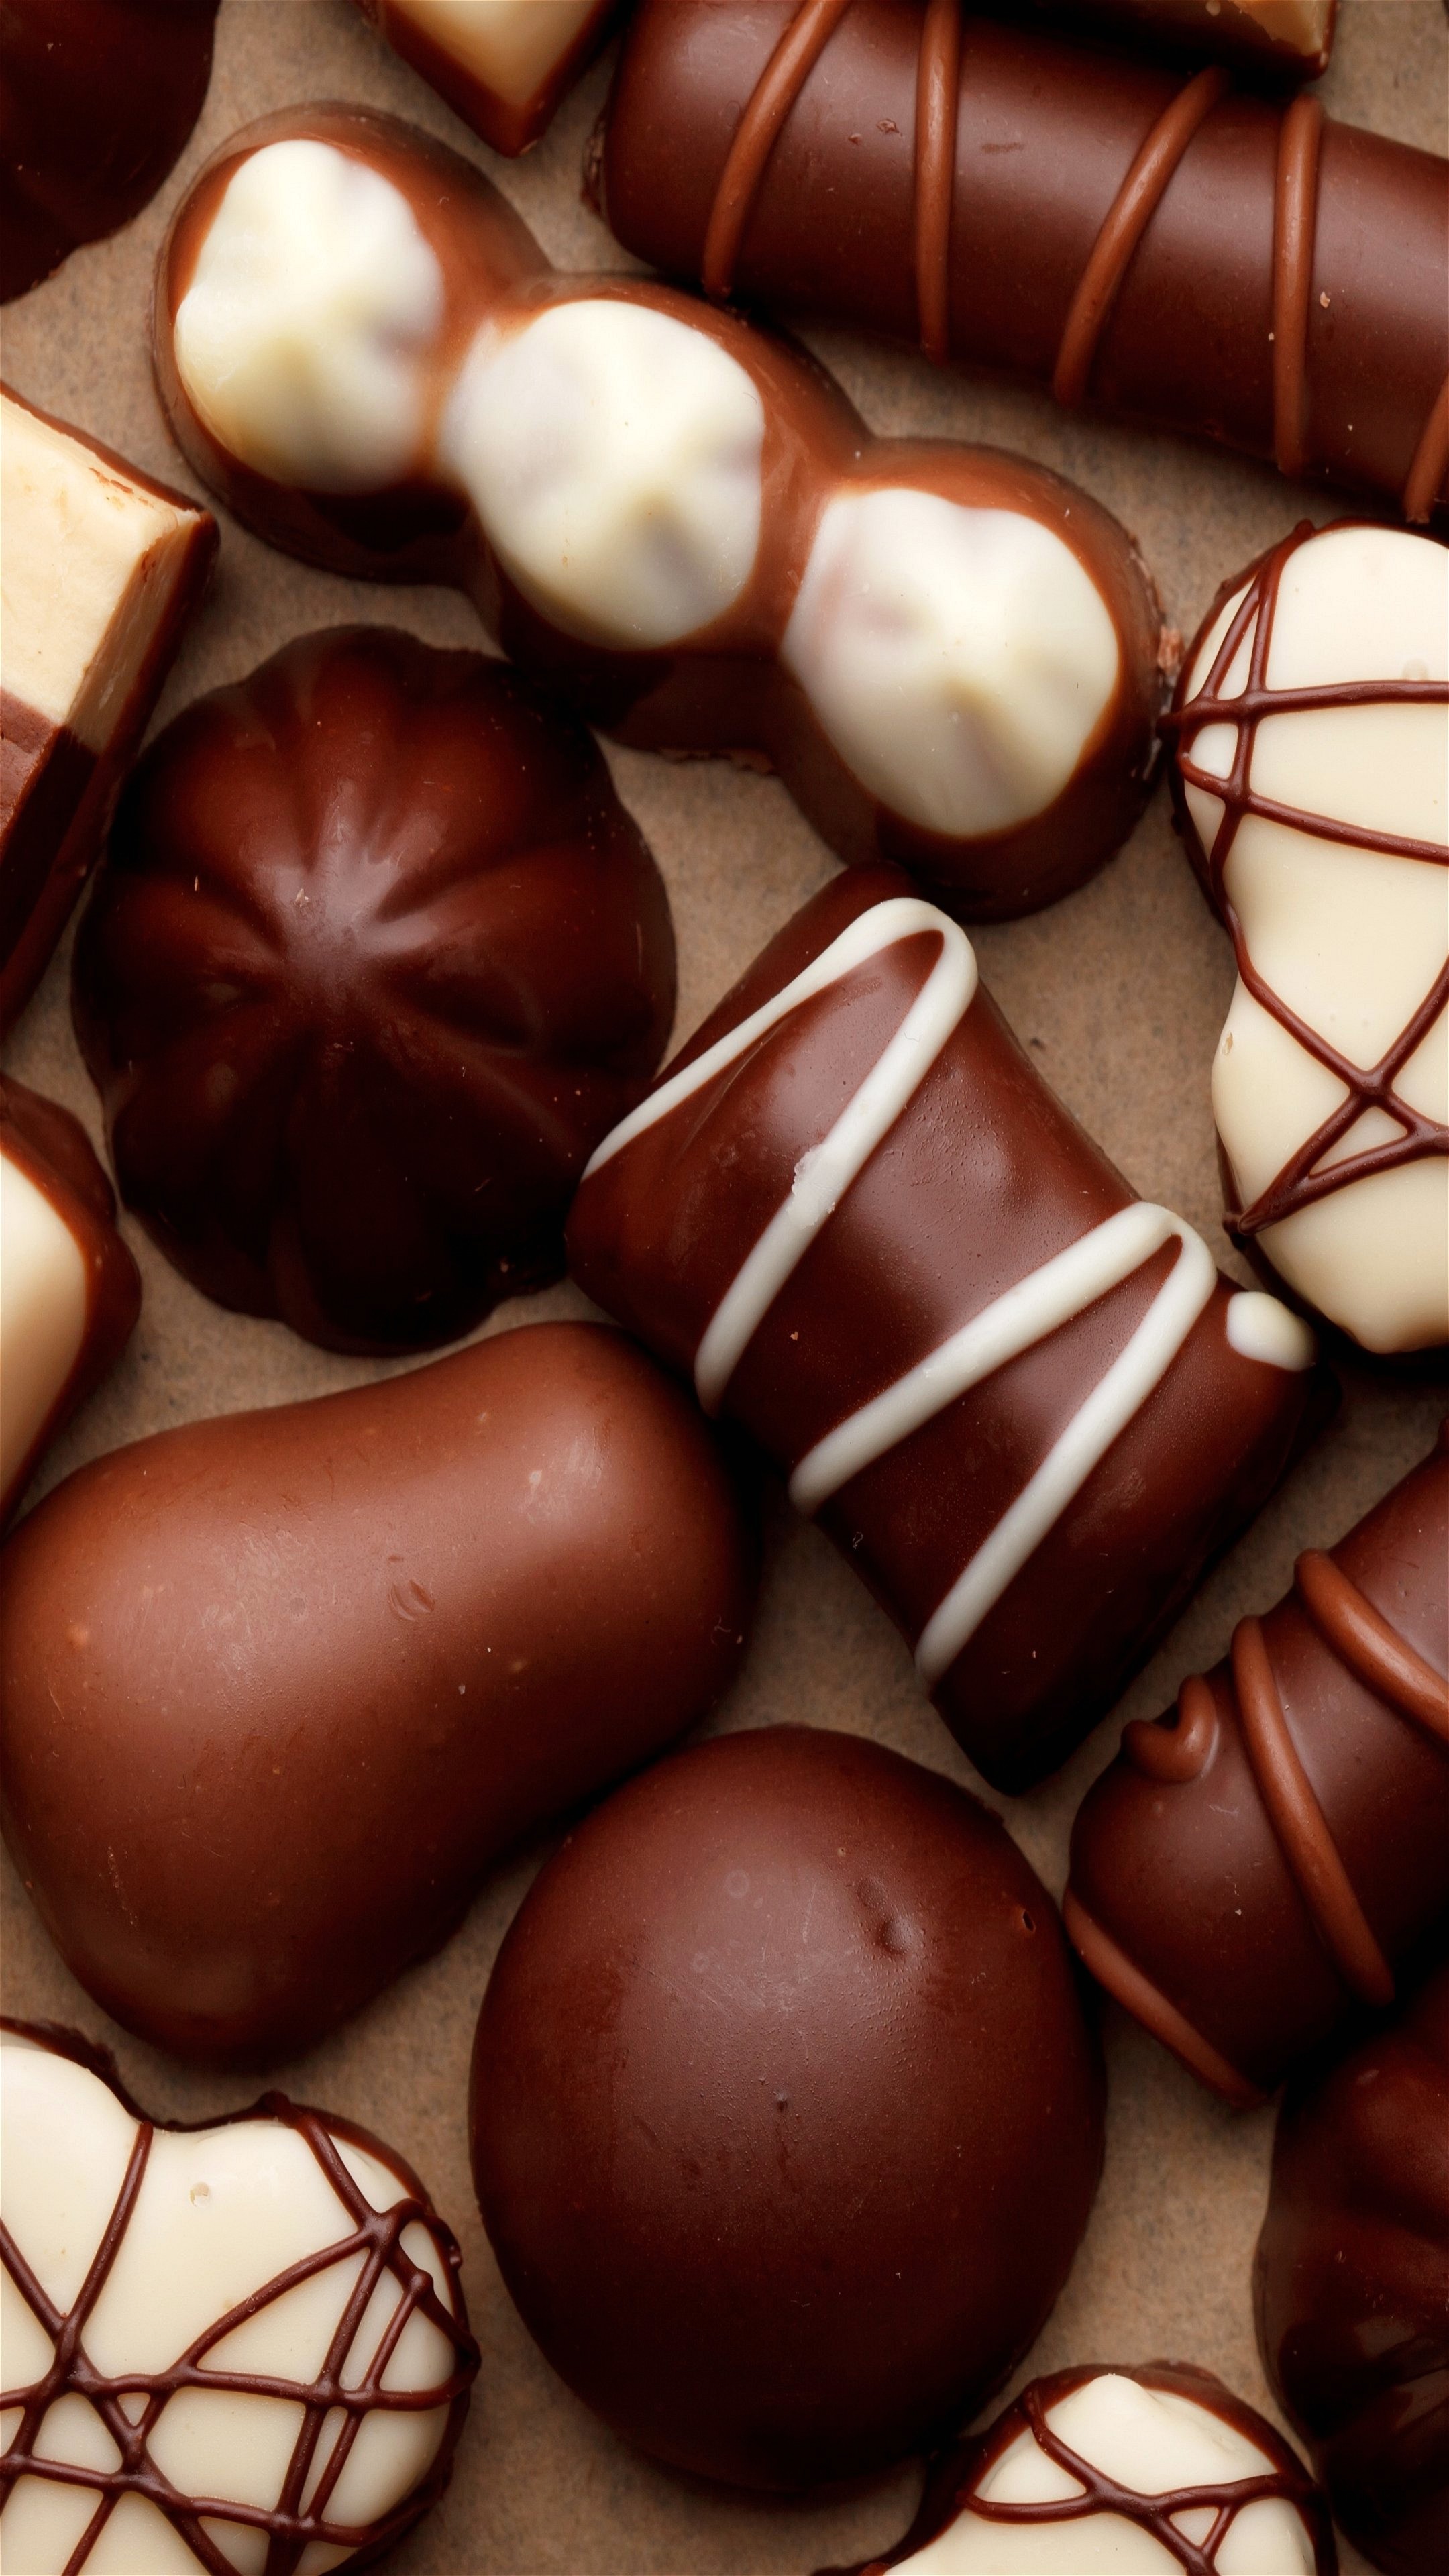 3d Wallpapers Of Chocolates - 2160x3840 Wallpaper 